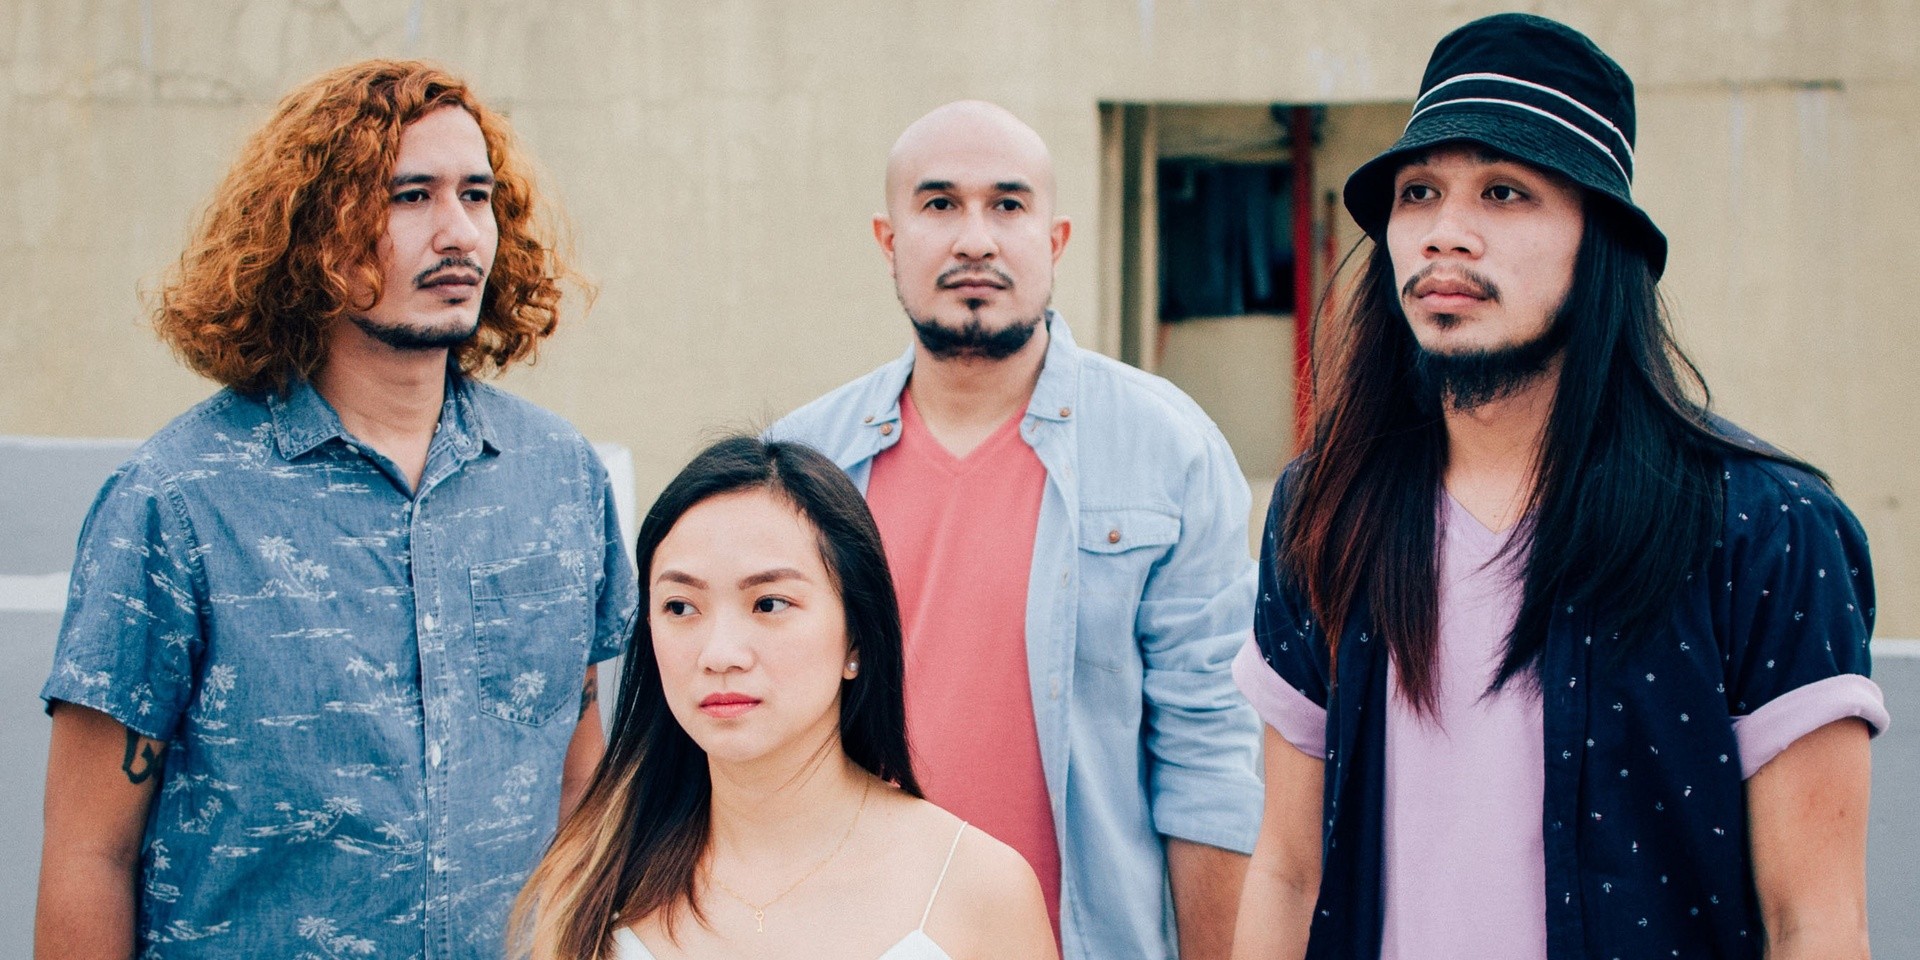 Indie rock outfit We Are Imaginary to make their Singapore debut at Esplanade's Rockin' the Region Series